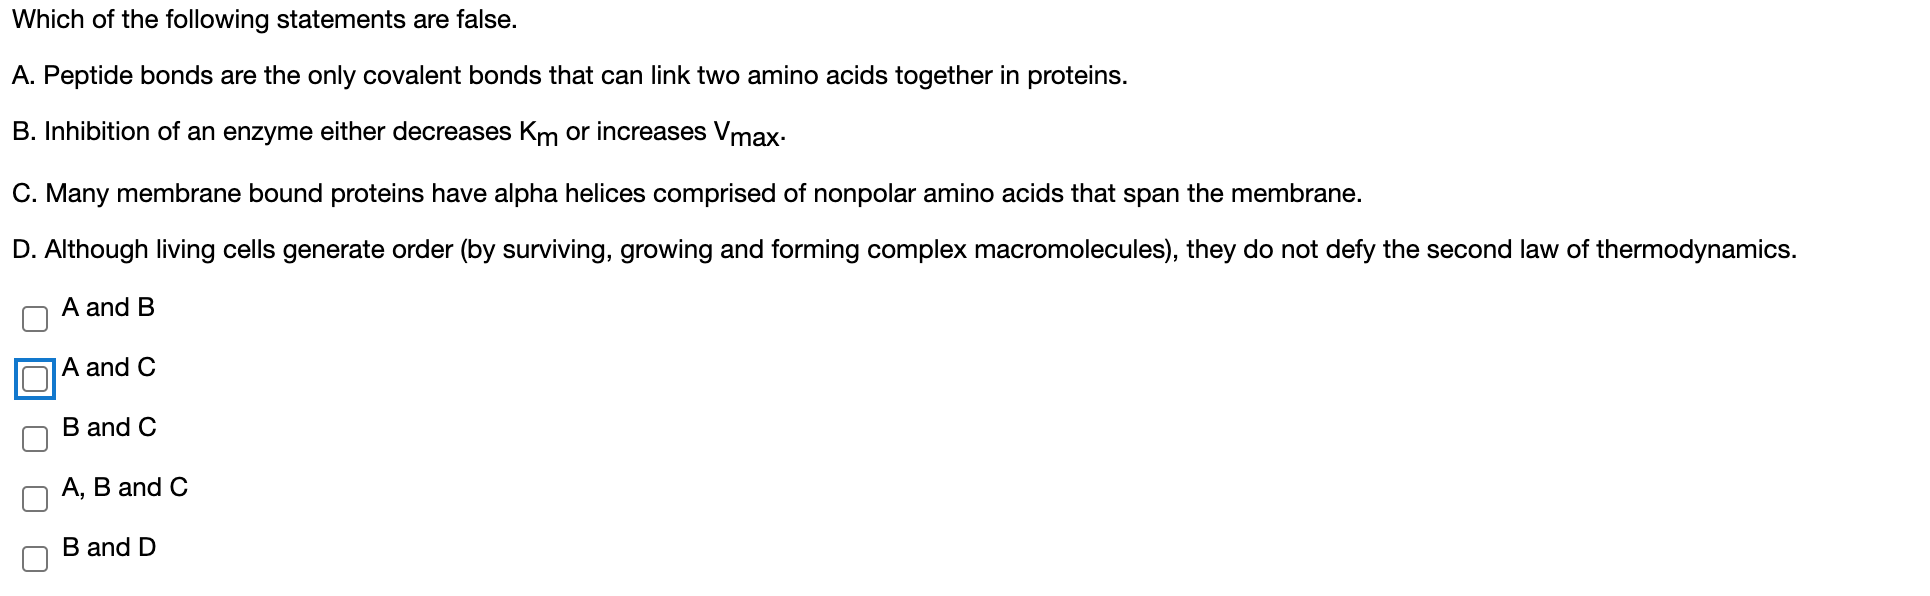 Which of the following statements are false.
A. Peptide bonds are the only covalent bonds that can link two amino acids together in proteins.
B. Inhibition of an enzyme either decreases Km or increases Vmax.
C. Many membrane bound proteins have alpha helices comprised of nonpolar amino acids that span the membrane.
D. Although living cells generate order (by surviving, growing and forming complex macromolecules), they do not defy the second law of thermodynamics.
A and B
A and C
B and C
А, В and C
B and D
